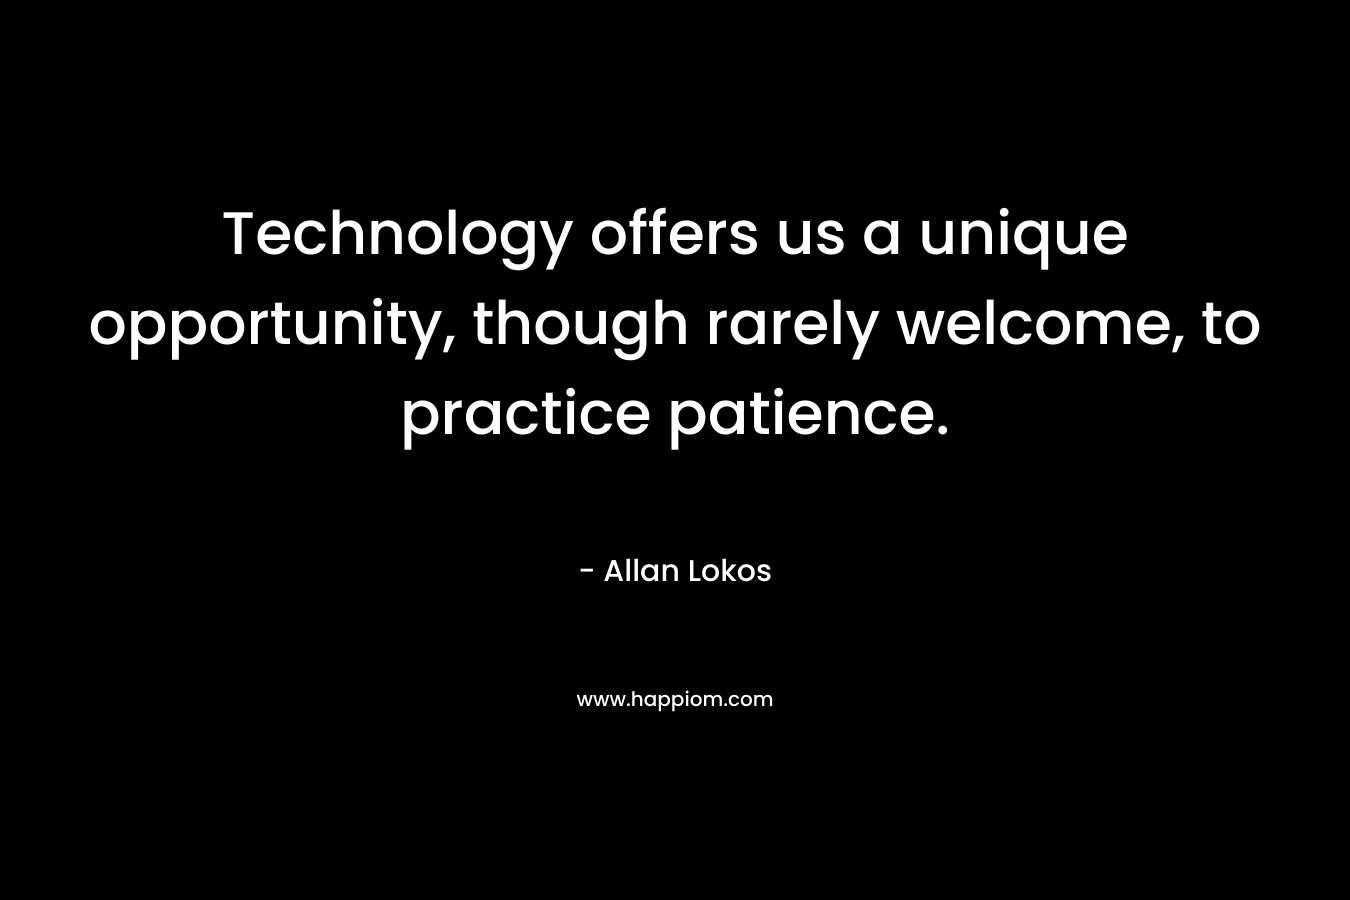 Technology offers us a unique opportunity, though rarely welcome, to practice patience.